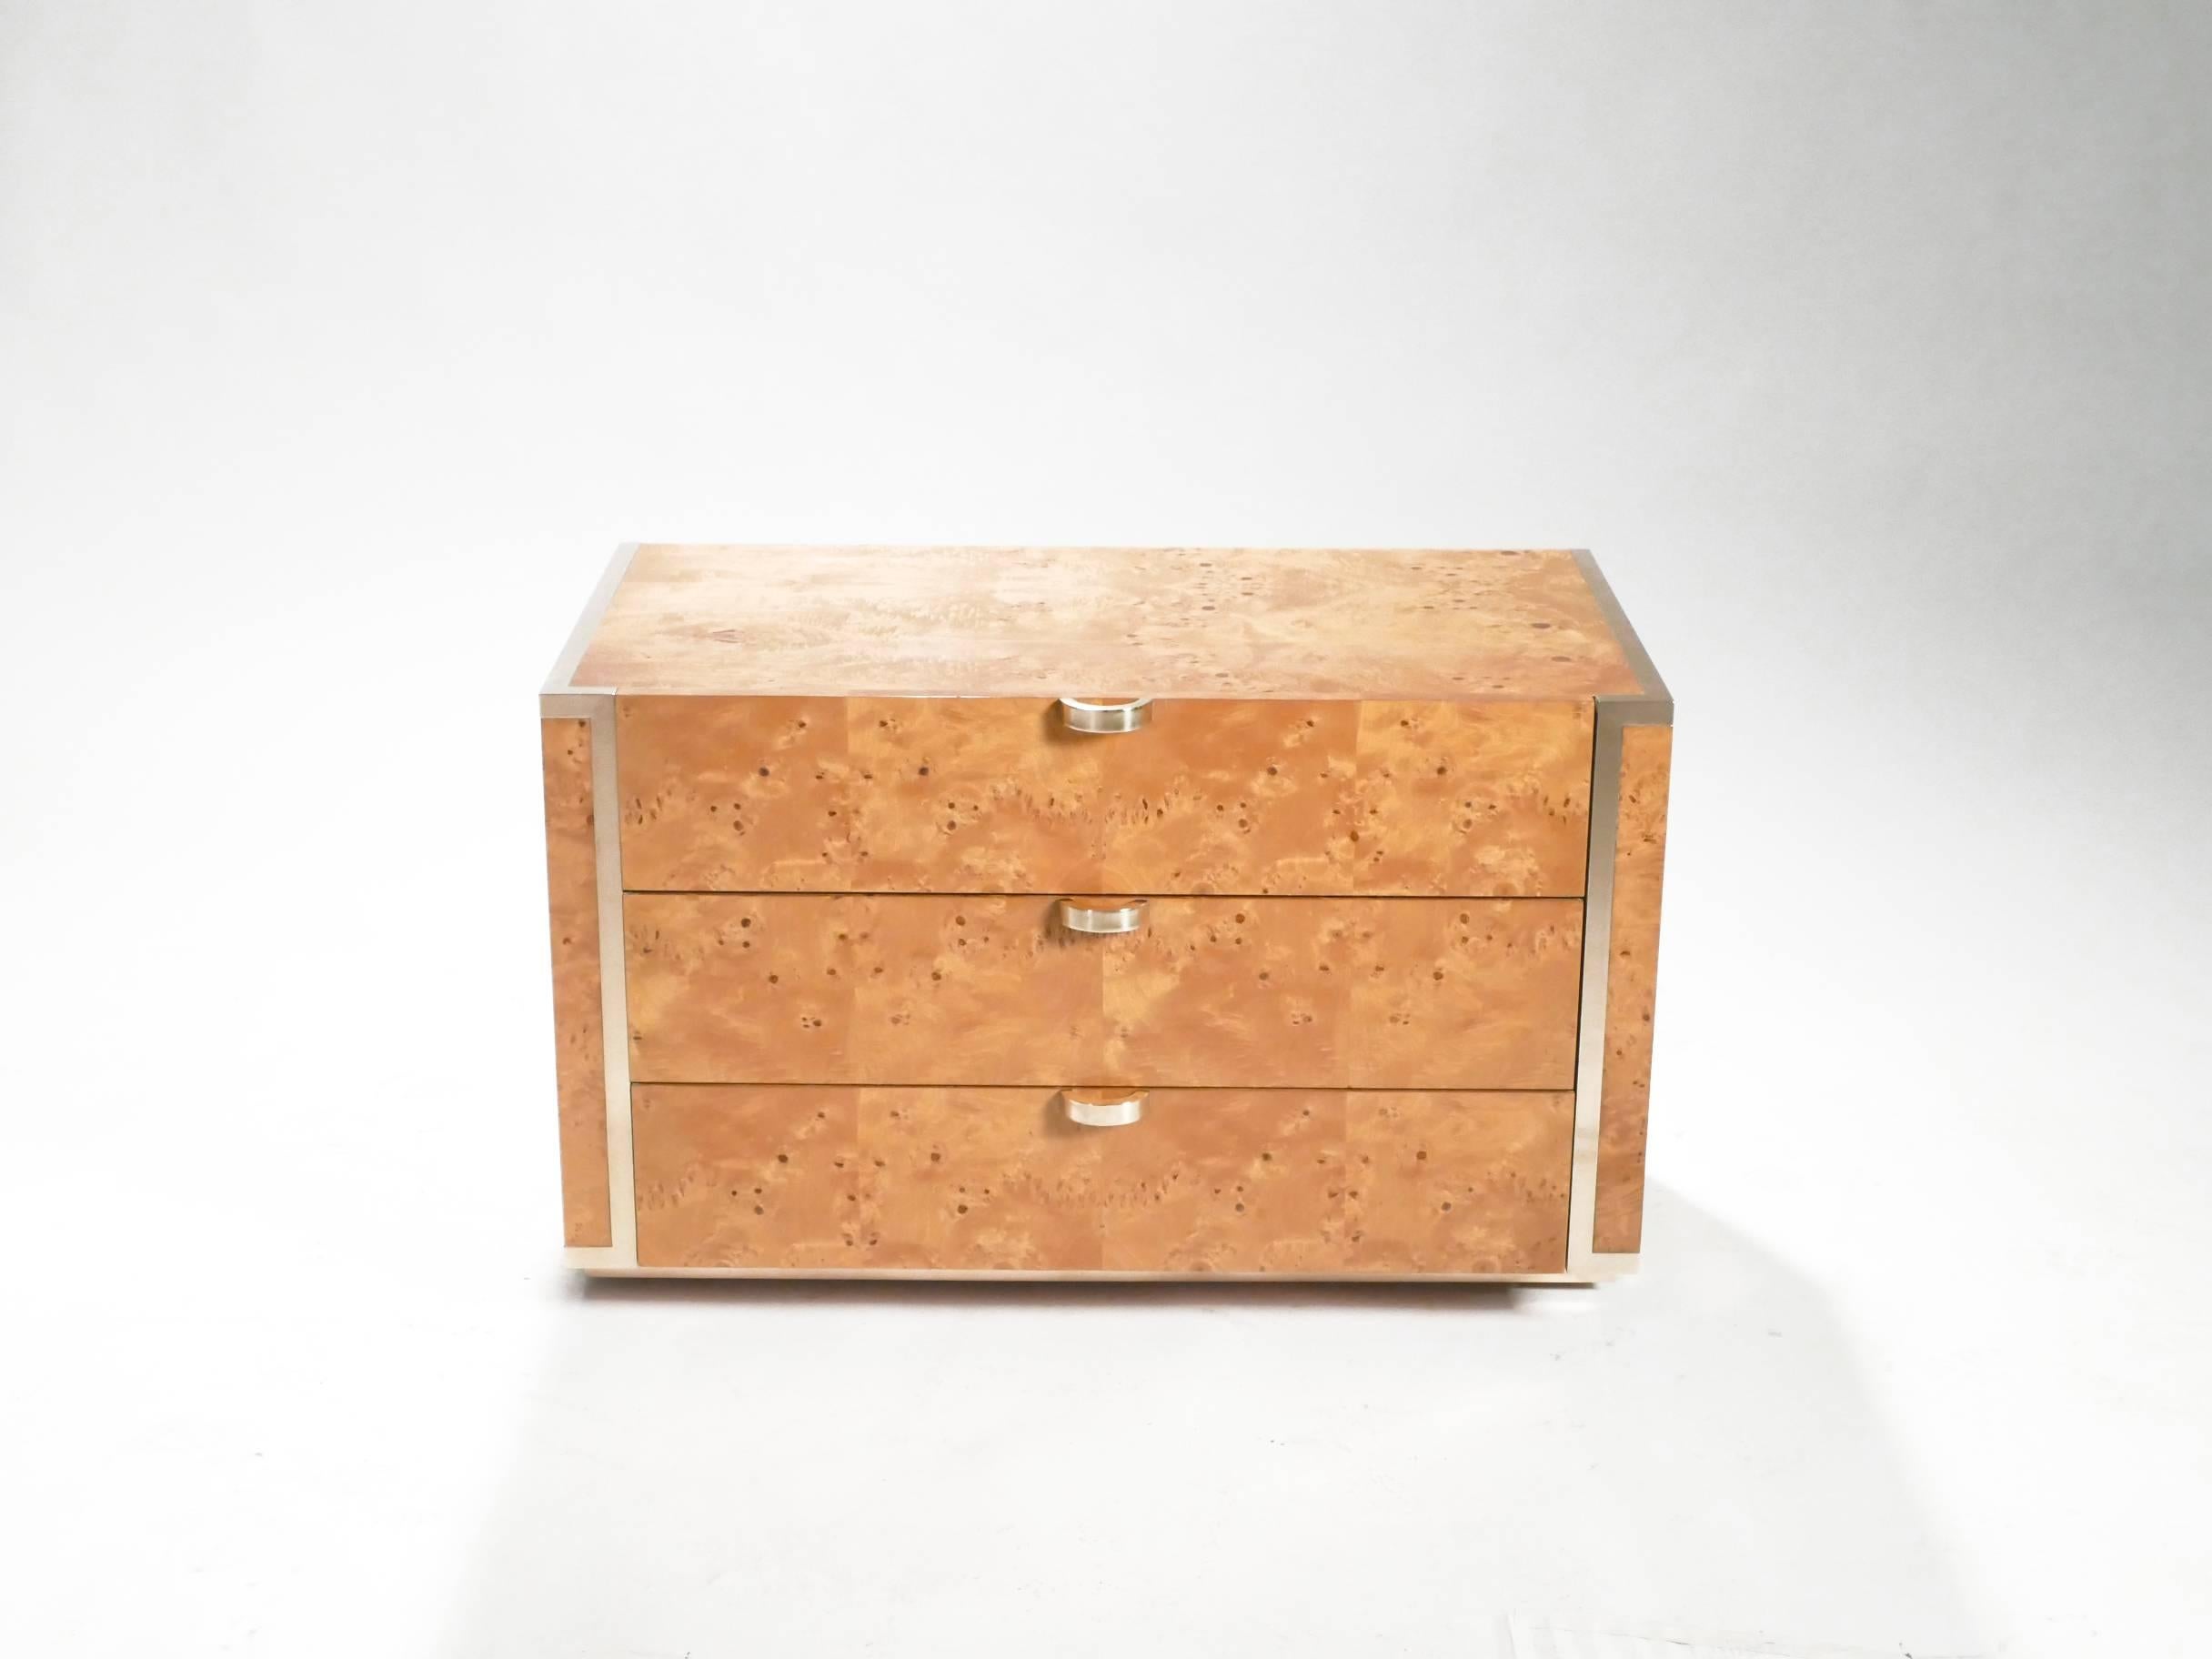 With its small size, neutral caramel color and roomy drawers, this chest of drawers is remarkably versatile for contemporary interiors the piece would do equally well as a nightstand, a side table, or an end table. It has a mid-century modern sleek